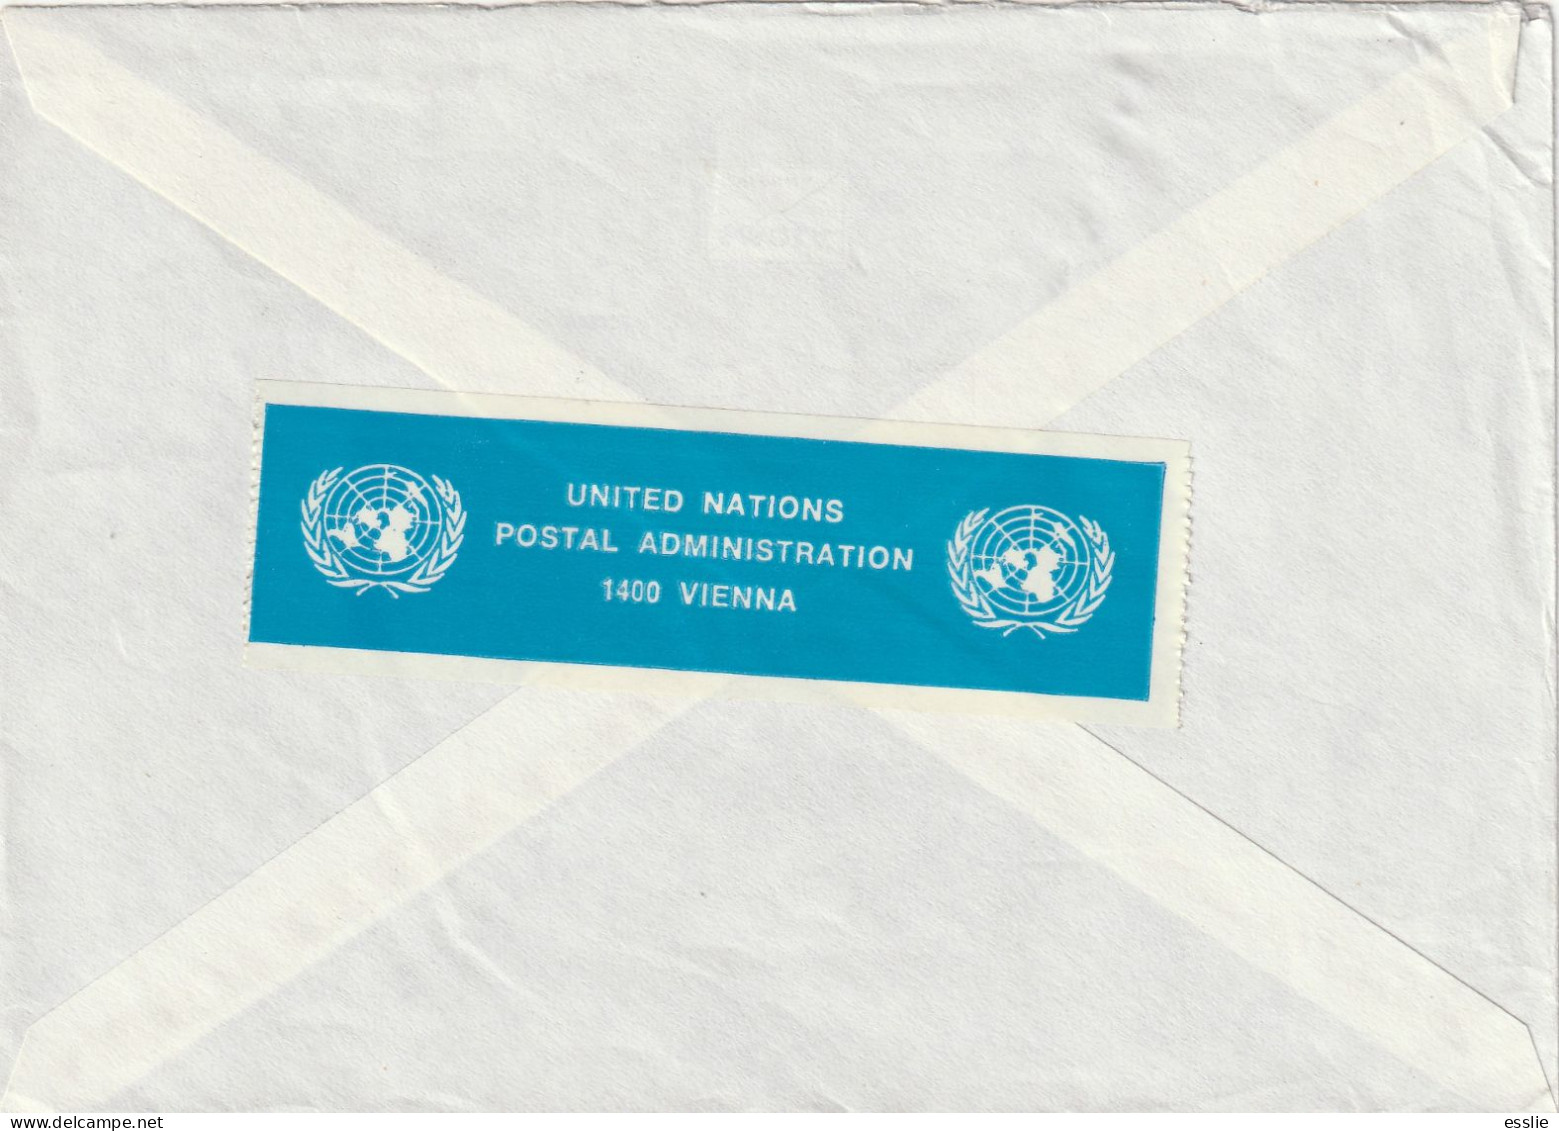 United Nations Cover Registered Vienna - 1990s - Zoll Douane United Nations Postal Administration - Covers & Documents